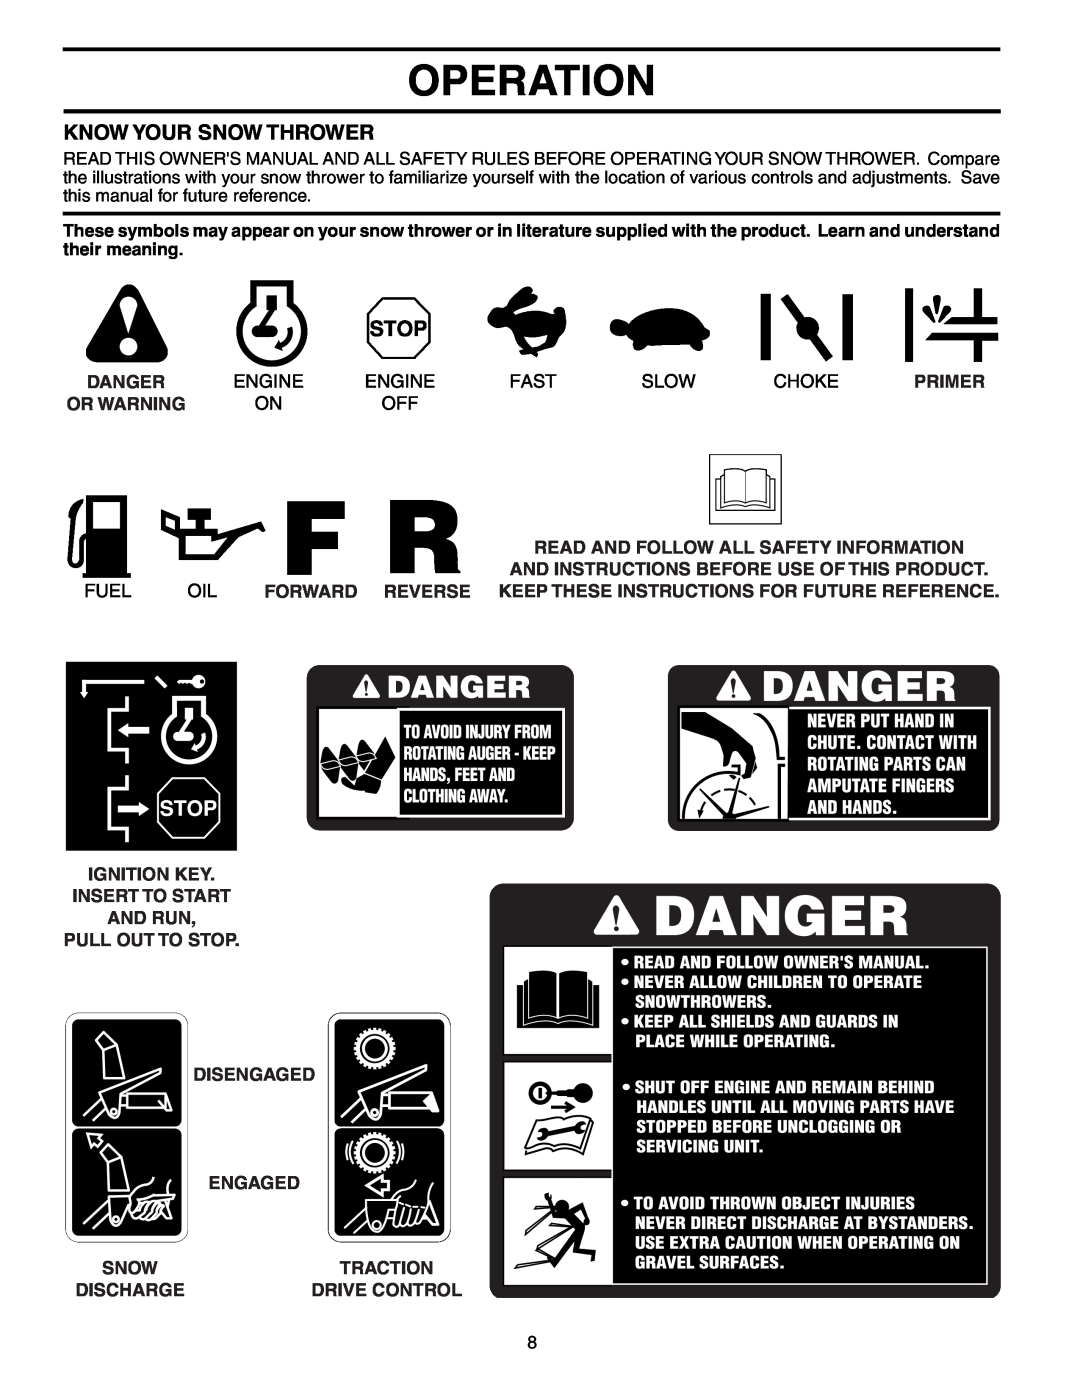 Poulan PR524ESA owner manual Operation, Know Your Snow Thrower 